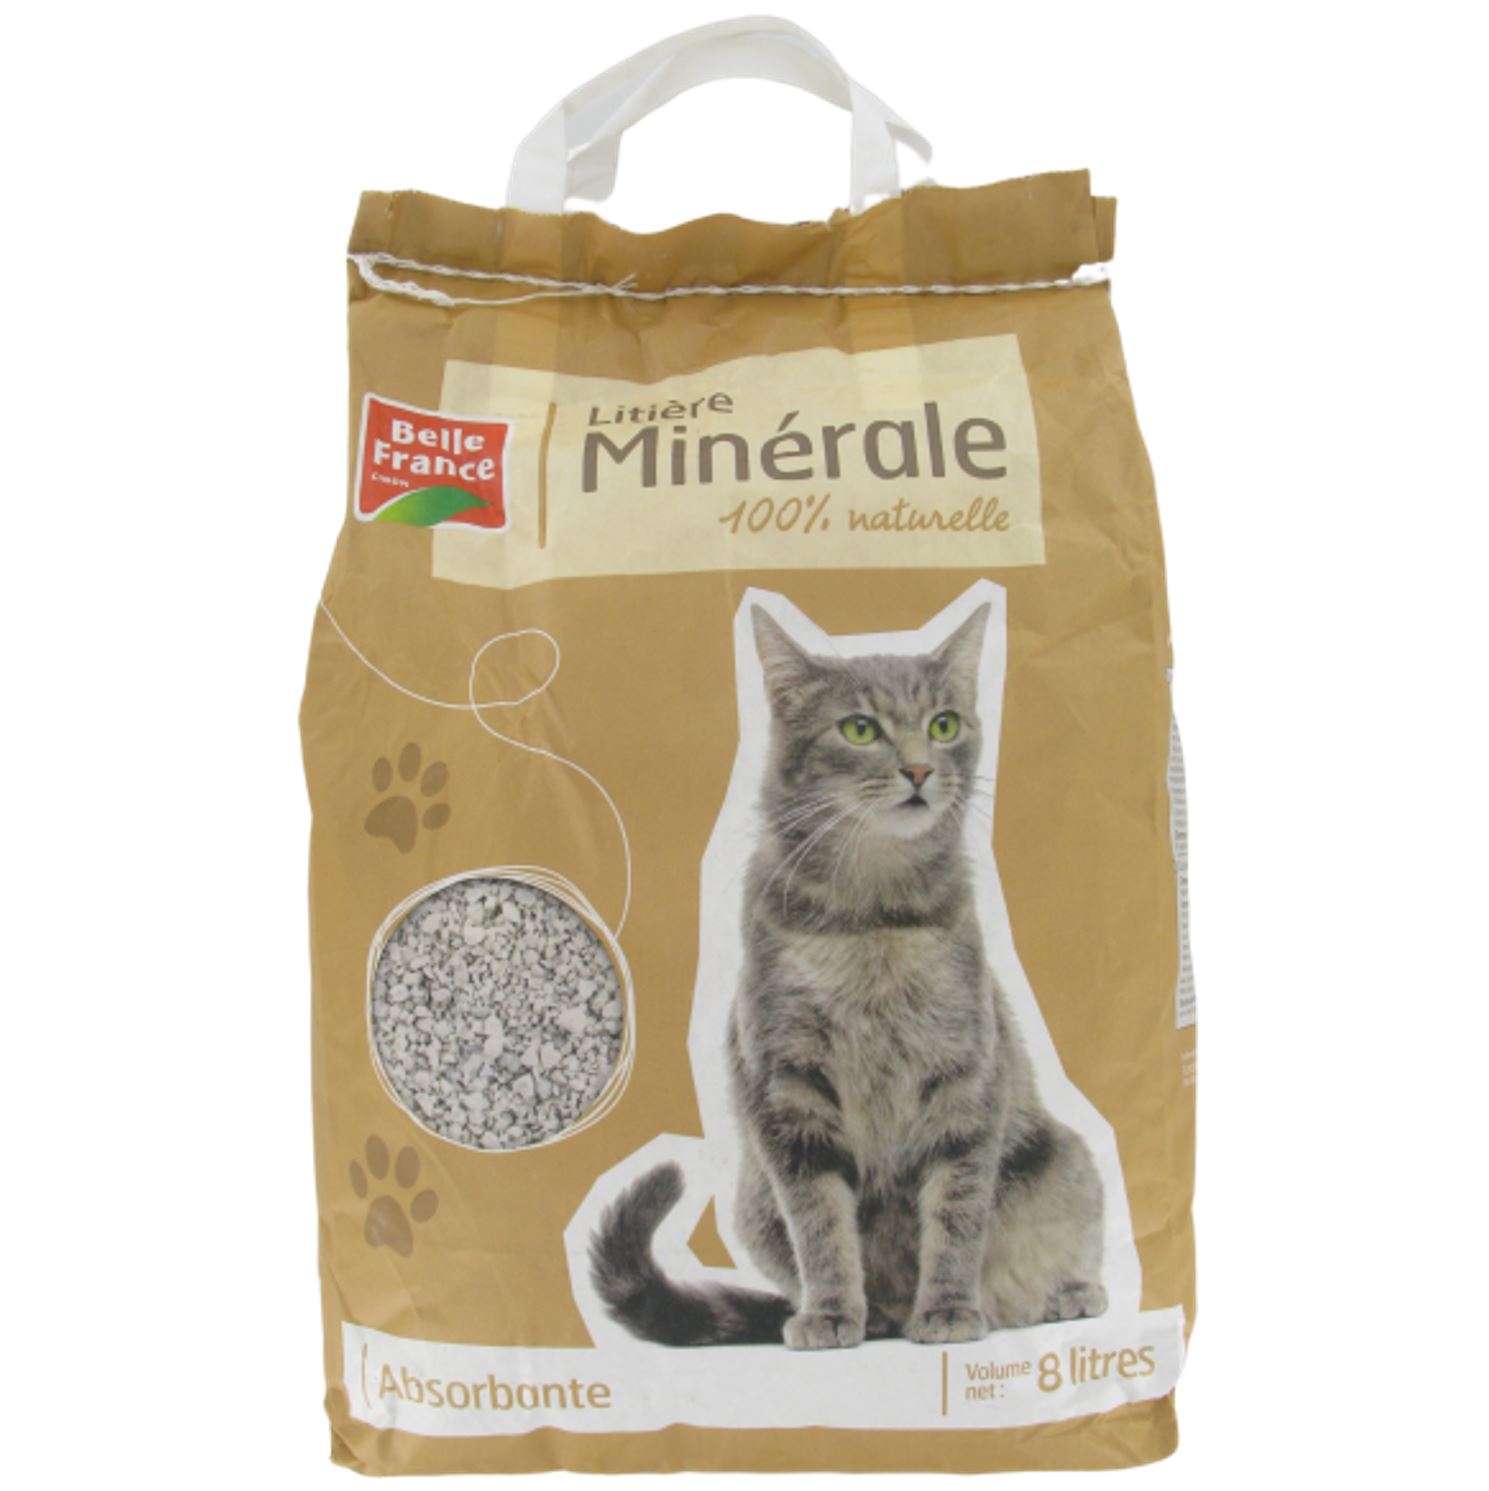 Litiere chat minerale